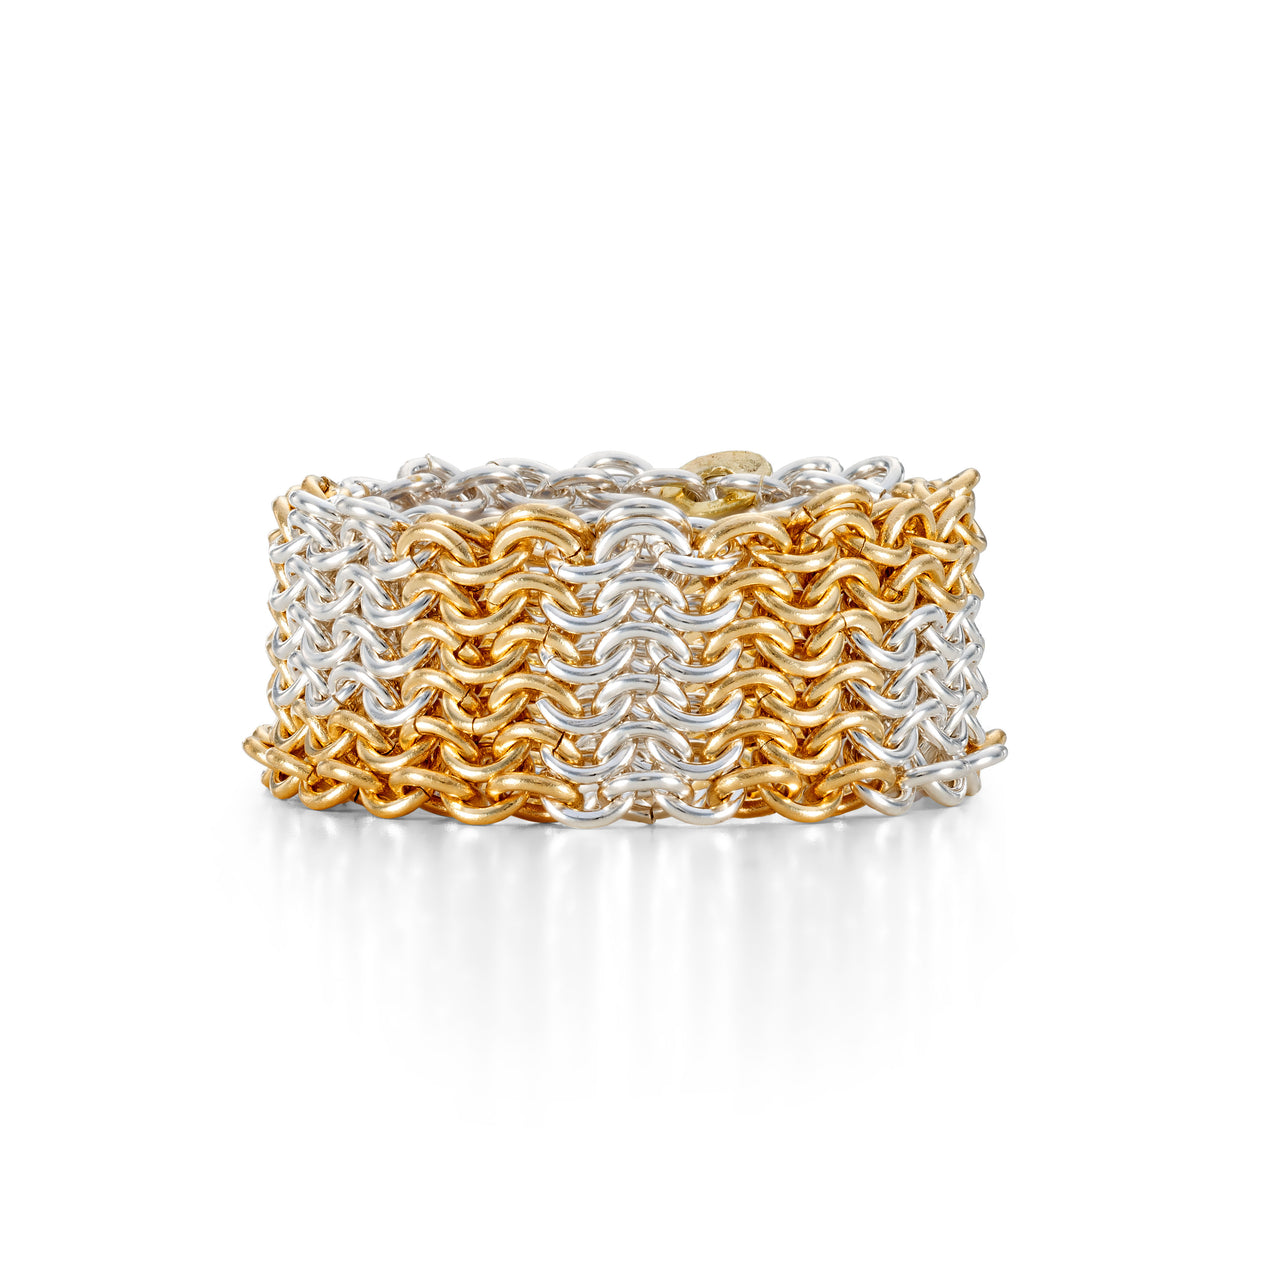 Wild Grasses' Chainmail Ring